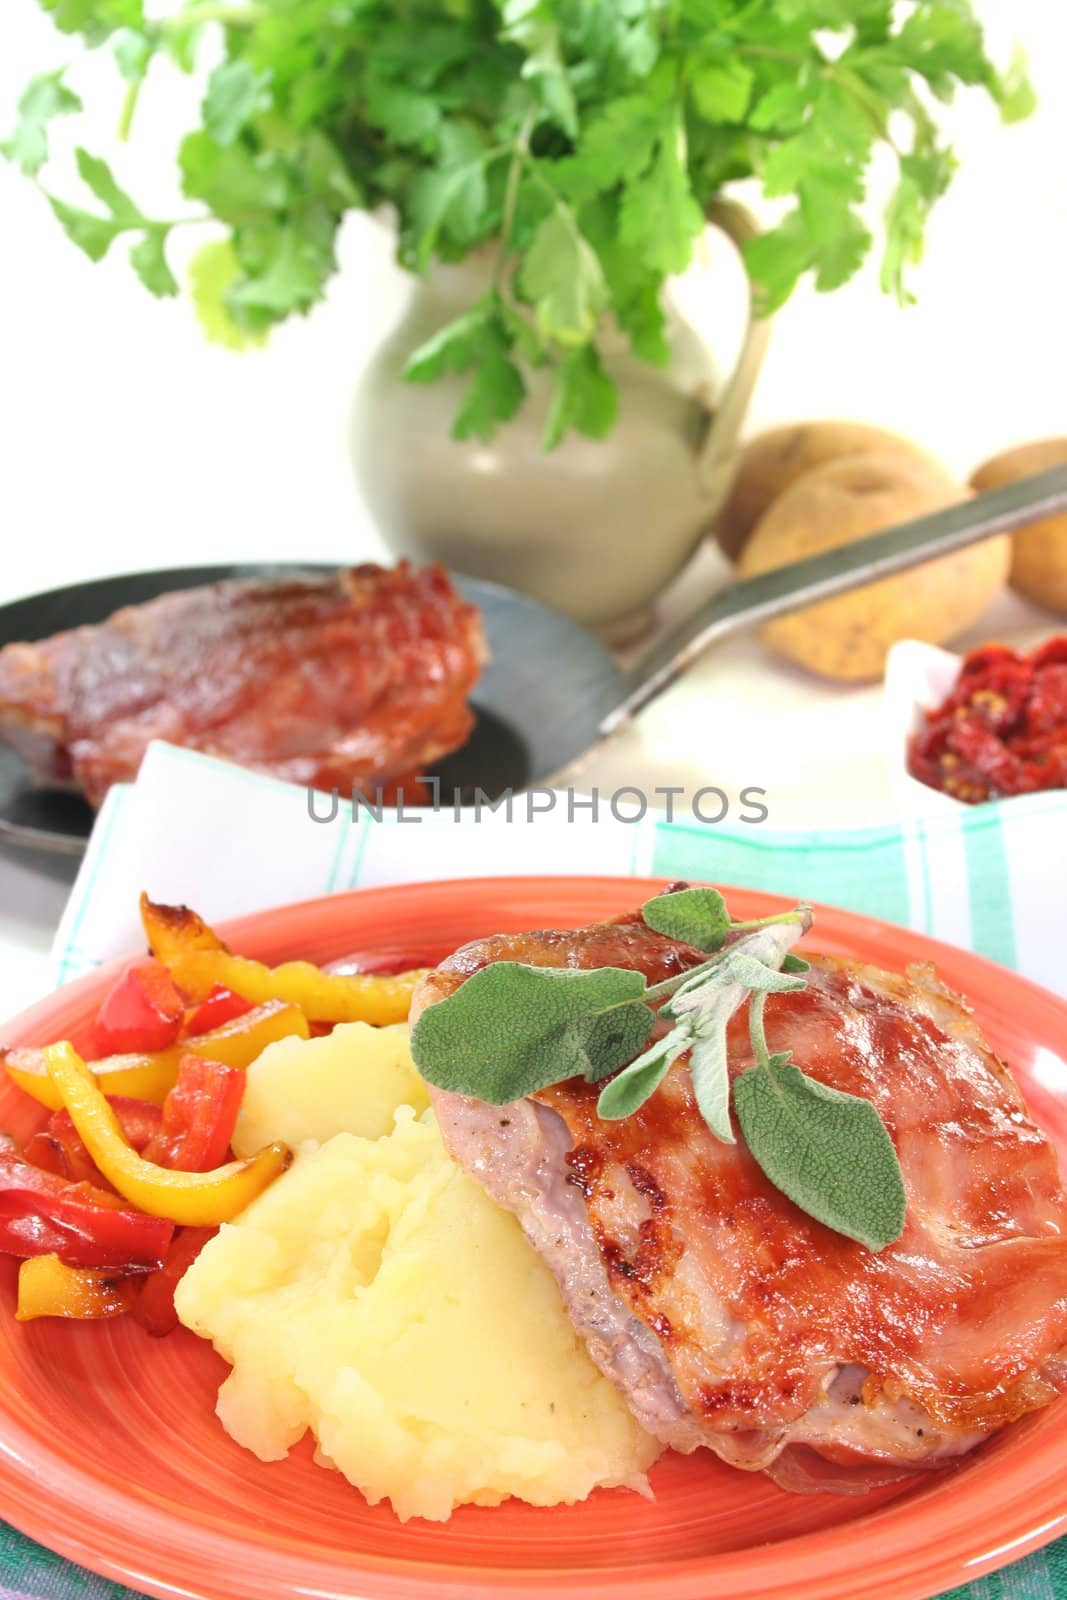 Saltimbocca of veal with bacon, sage and dried tomatoes